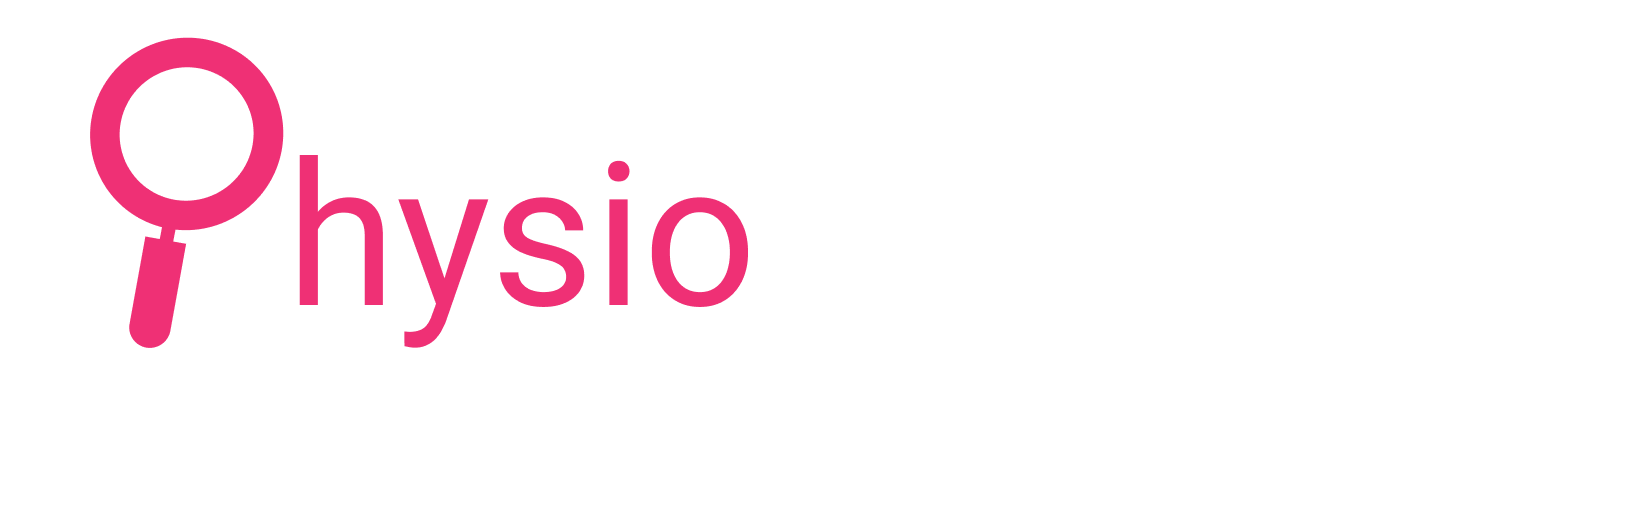 Physiokeys-new-logo-two-colors